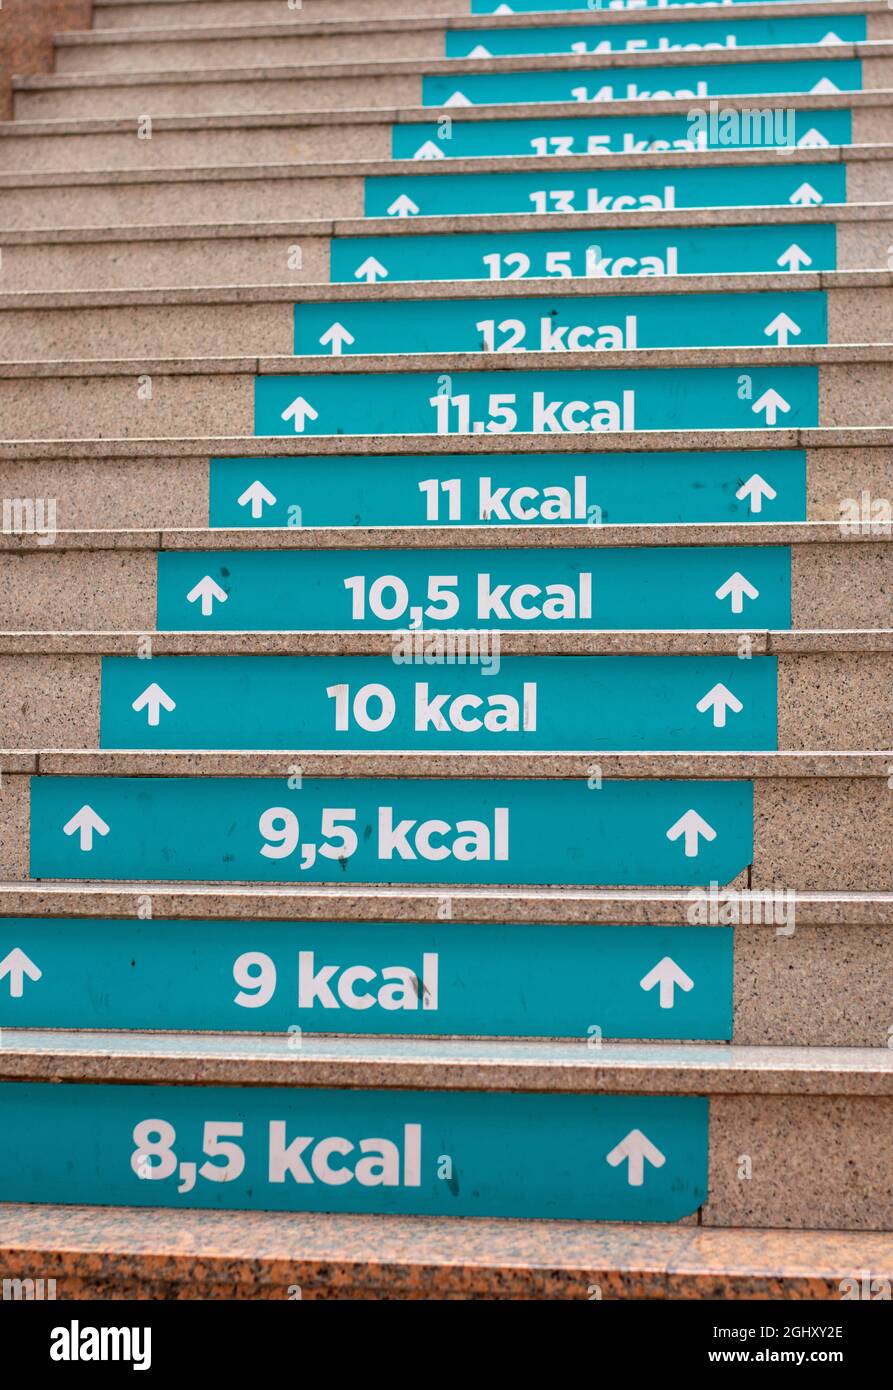 Calories count at Staircase in shopping mall. Each step half calories burned. Exercises awareness concept. Stock Photo